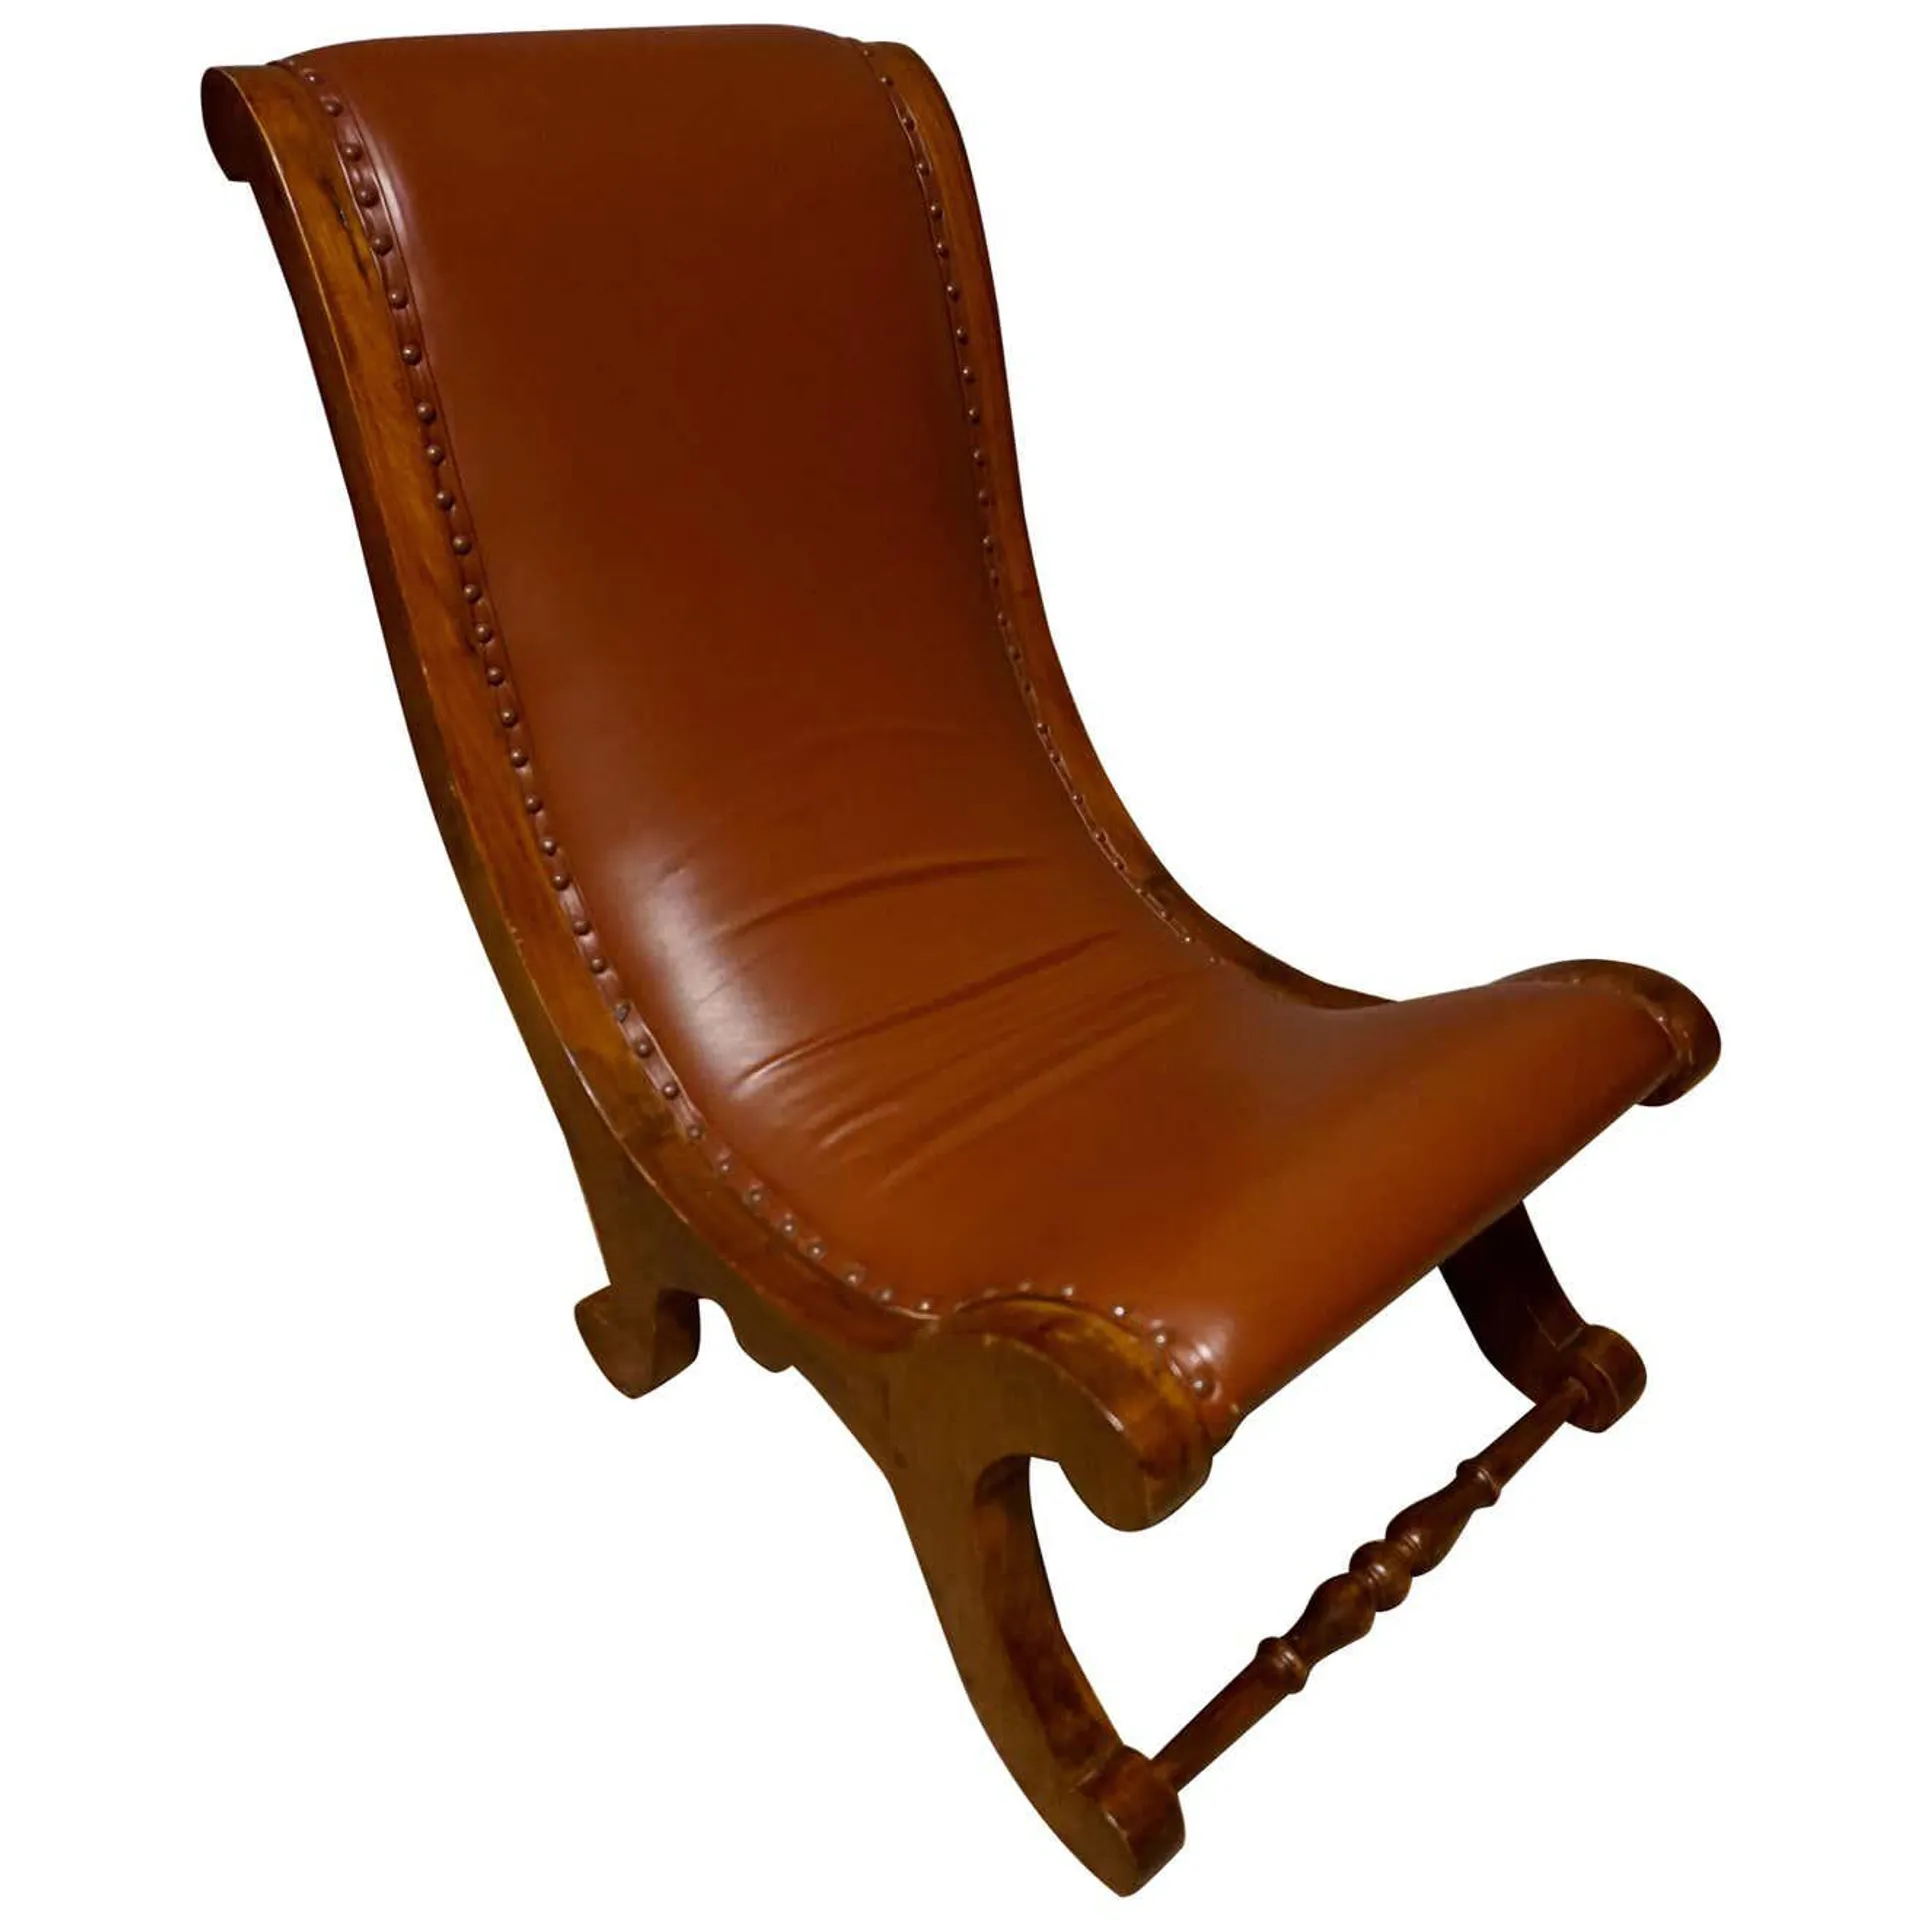 British Colonial Teak Slipper Chair With Leather Upholstery